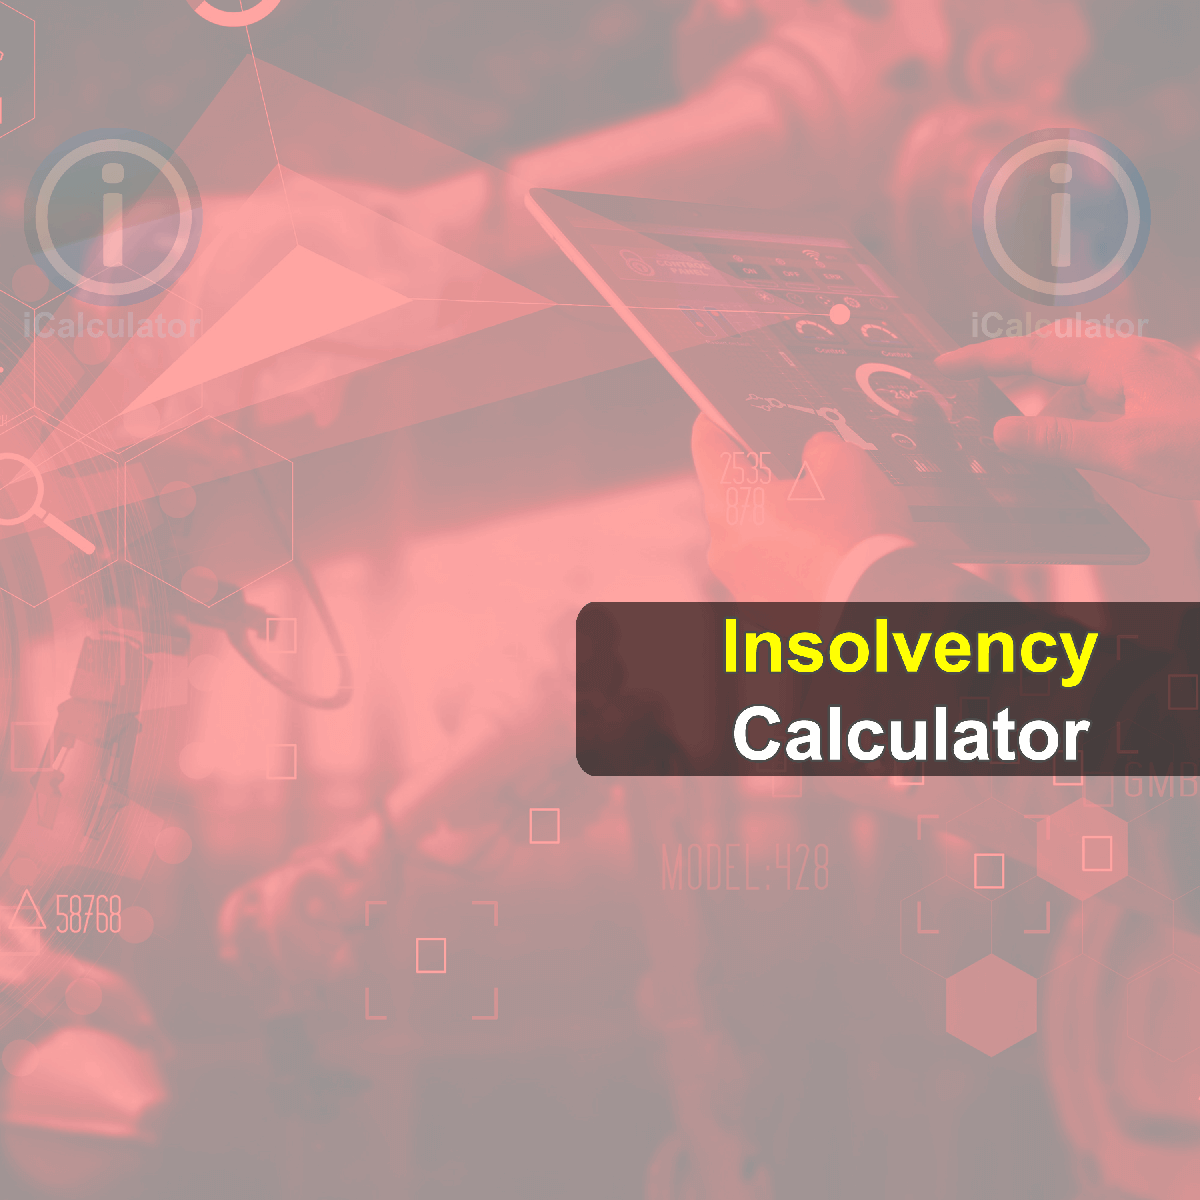 Insolvency Calculator. This image shows a business owner calculating his companies total assets and liabilities to ascertain if the company is insolvent using the Insolvency Calculator